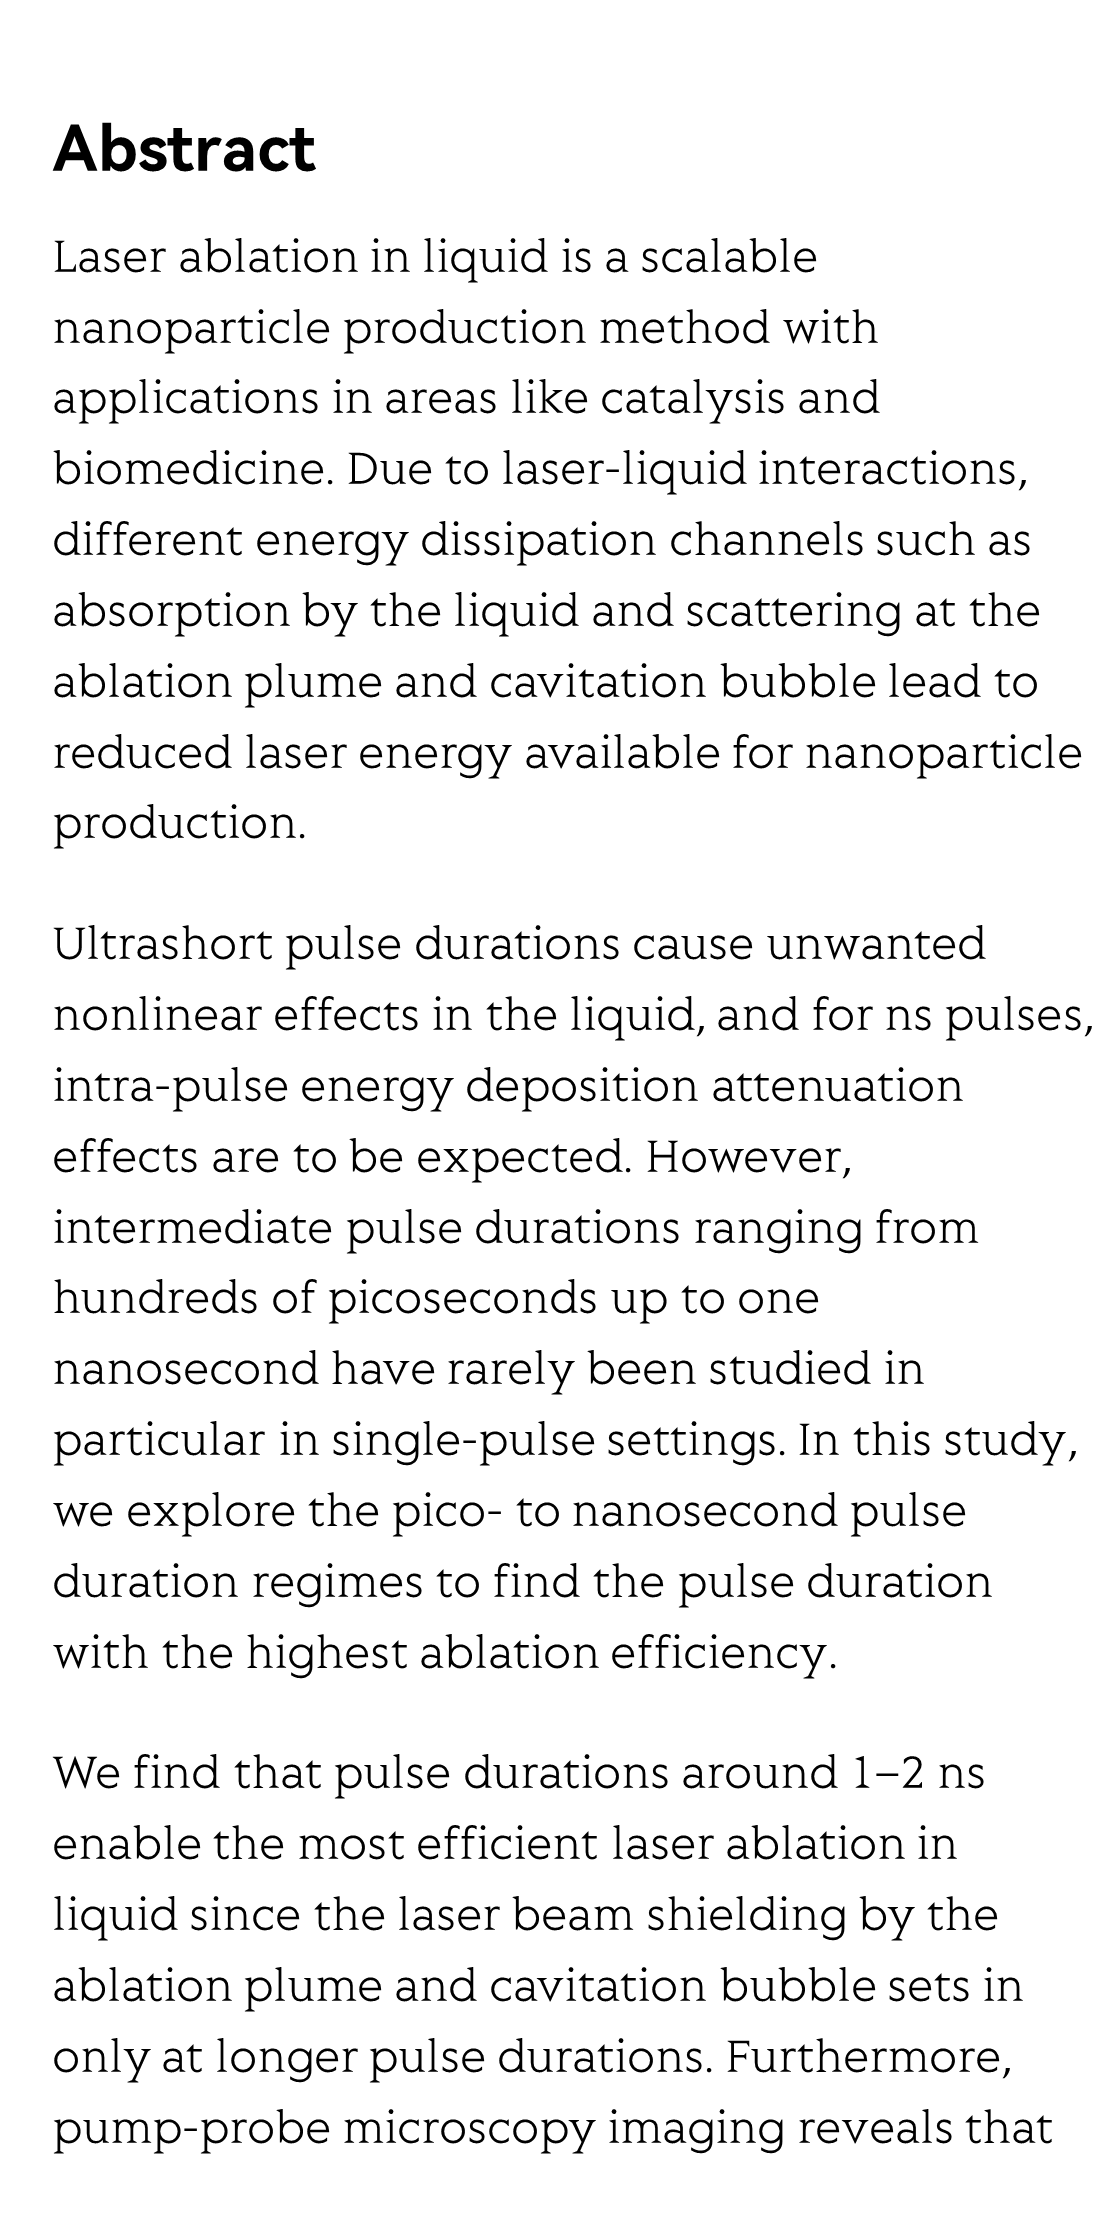 Time resolved studies reveal the origin of the unparalleled high efficiency of one nanosecond laser ablation in liquids_2